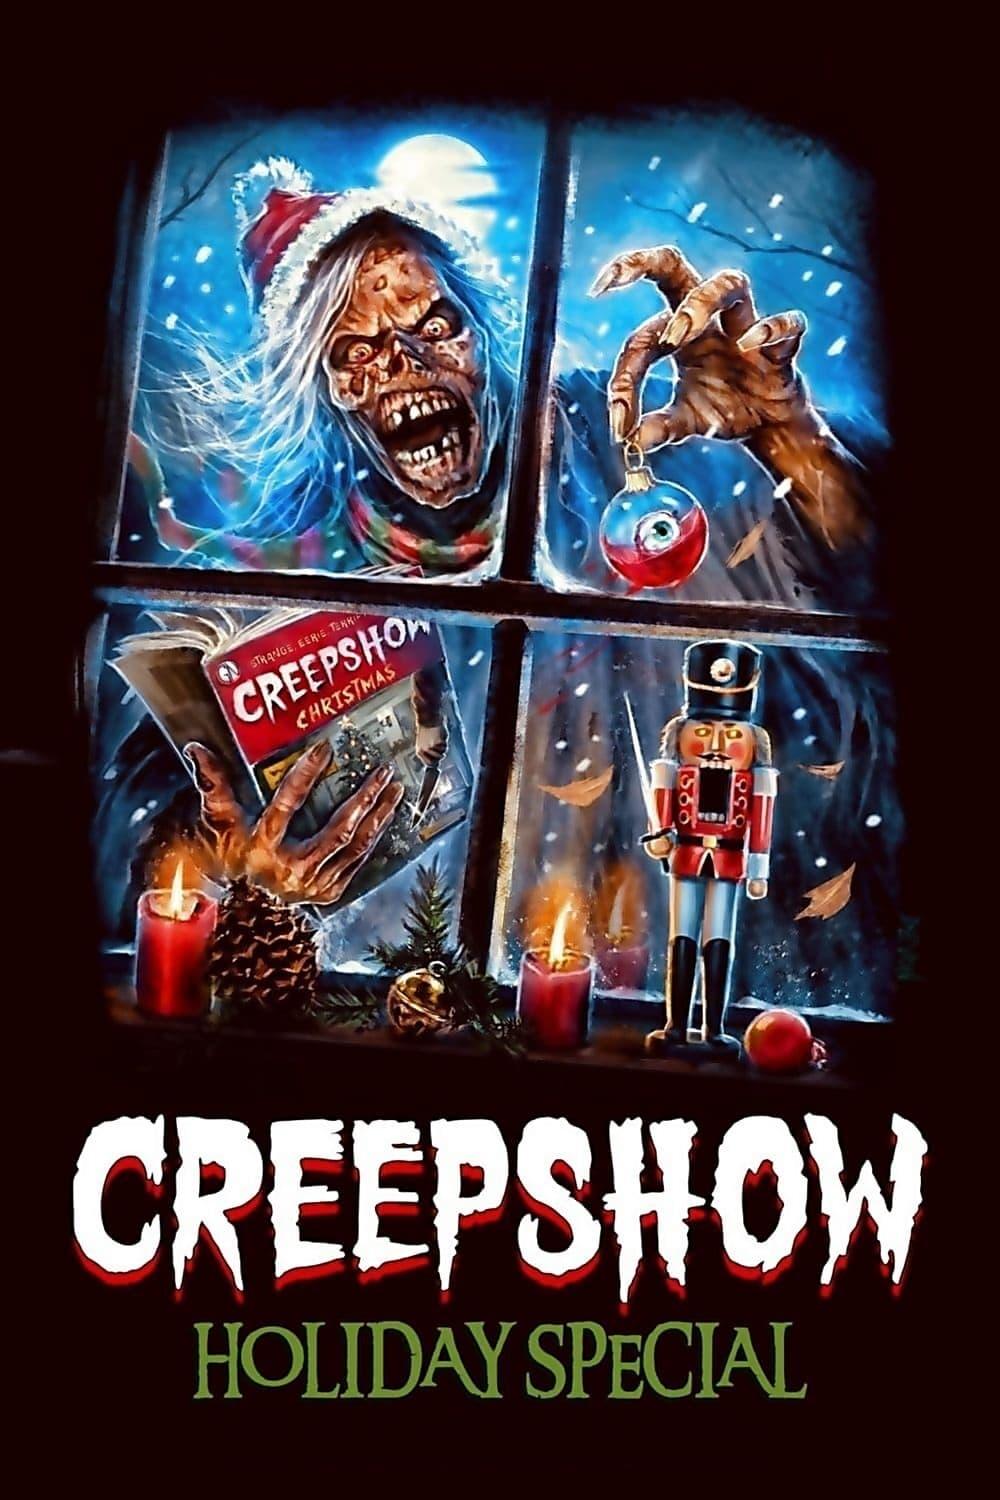 A Creepshow Holiday Special poster